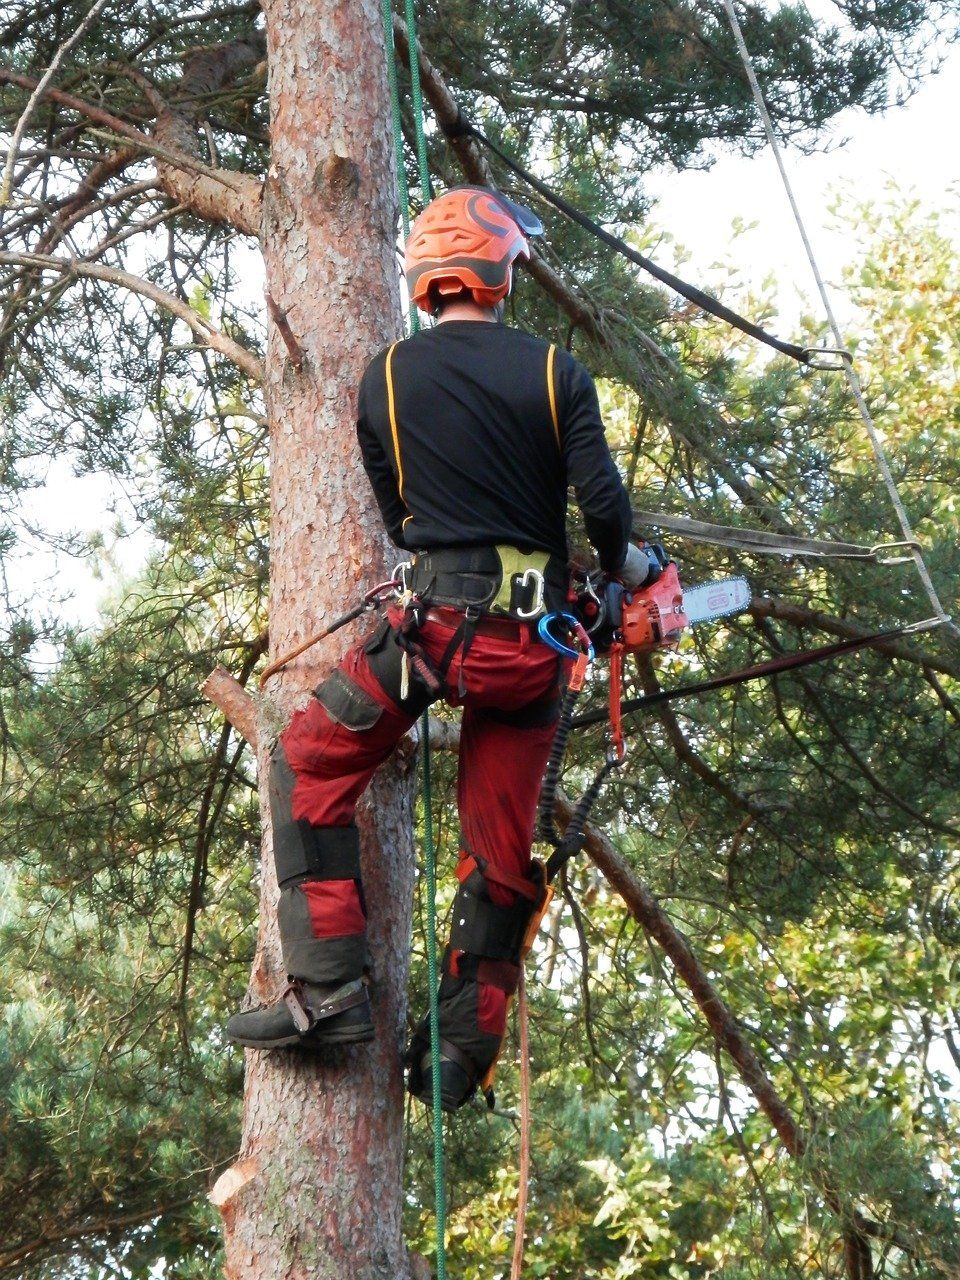 One of our brave and hard working tree climbers is pictured here, cutting down a tree in Taunton Massachusetts